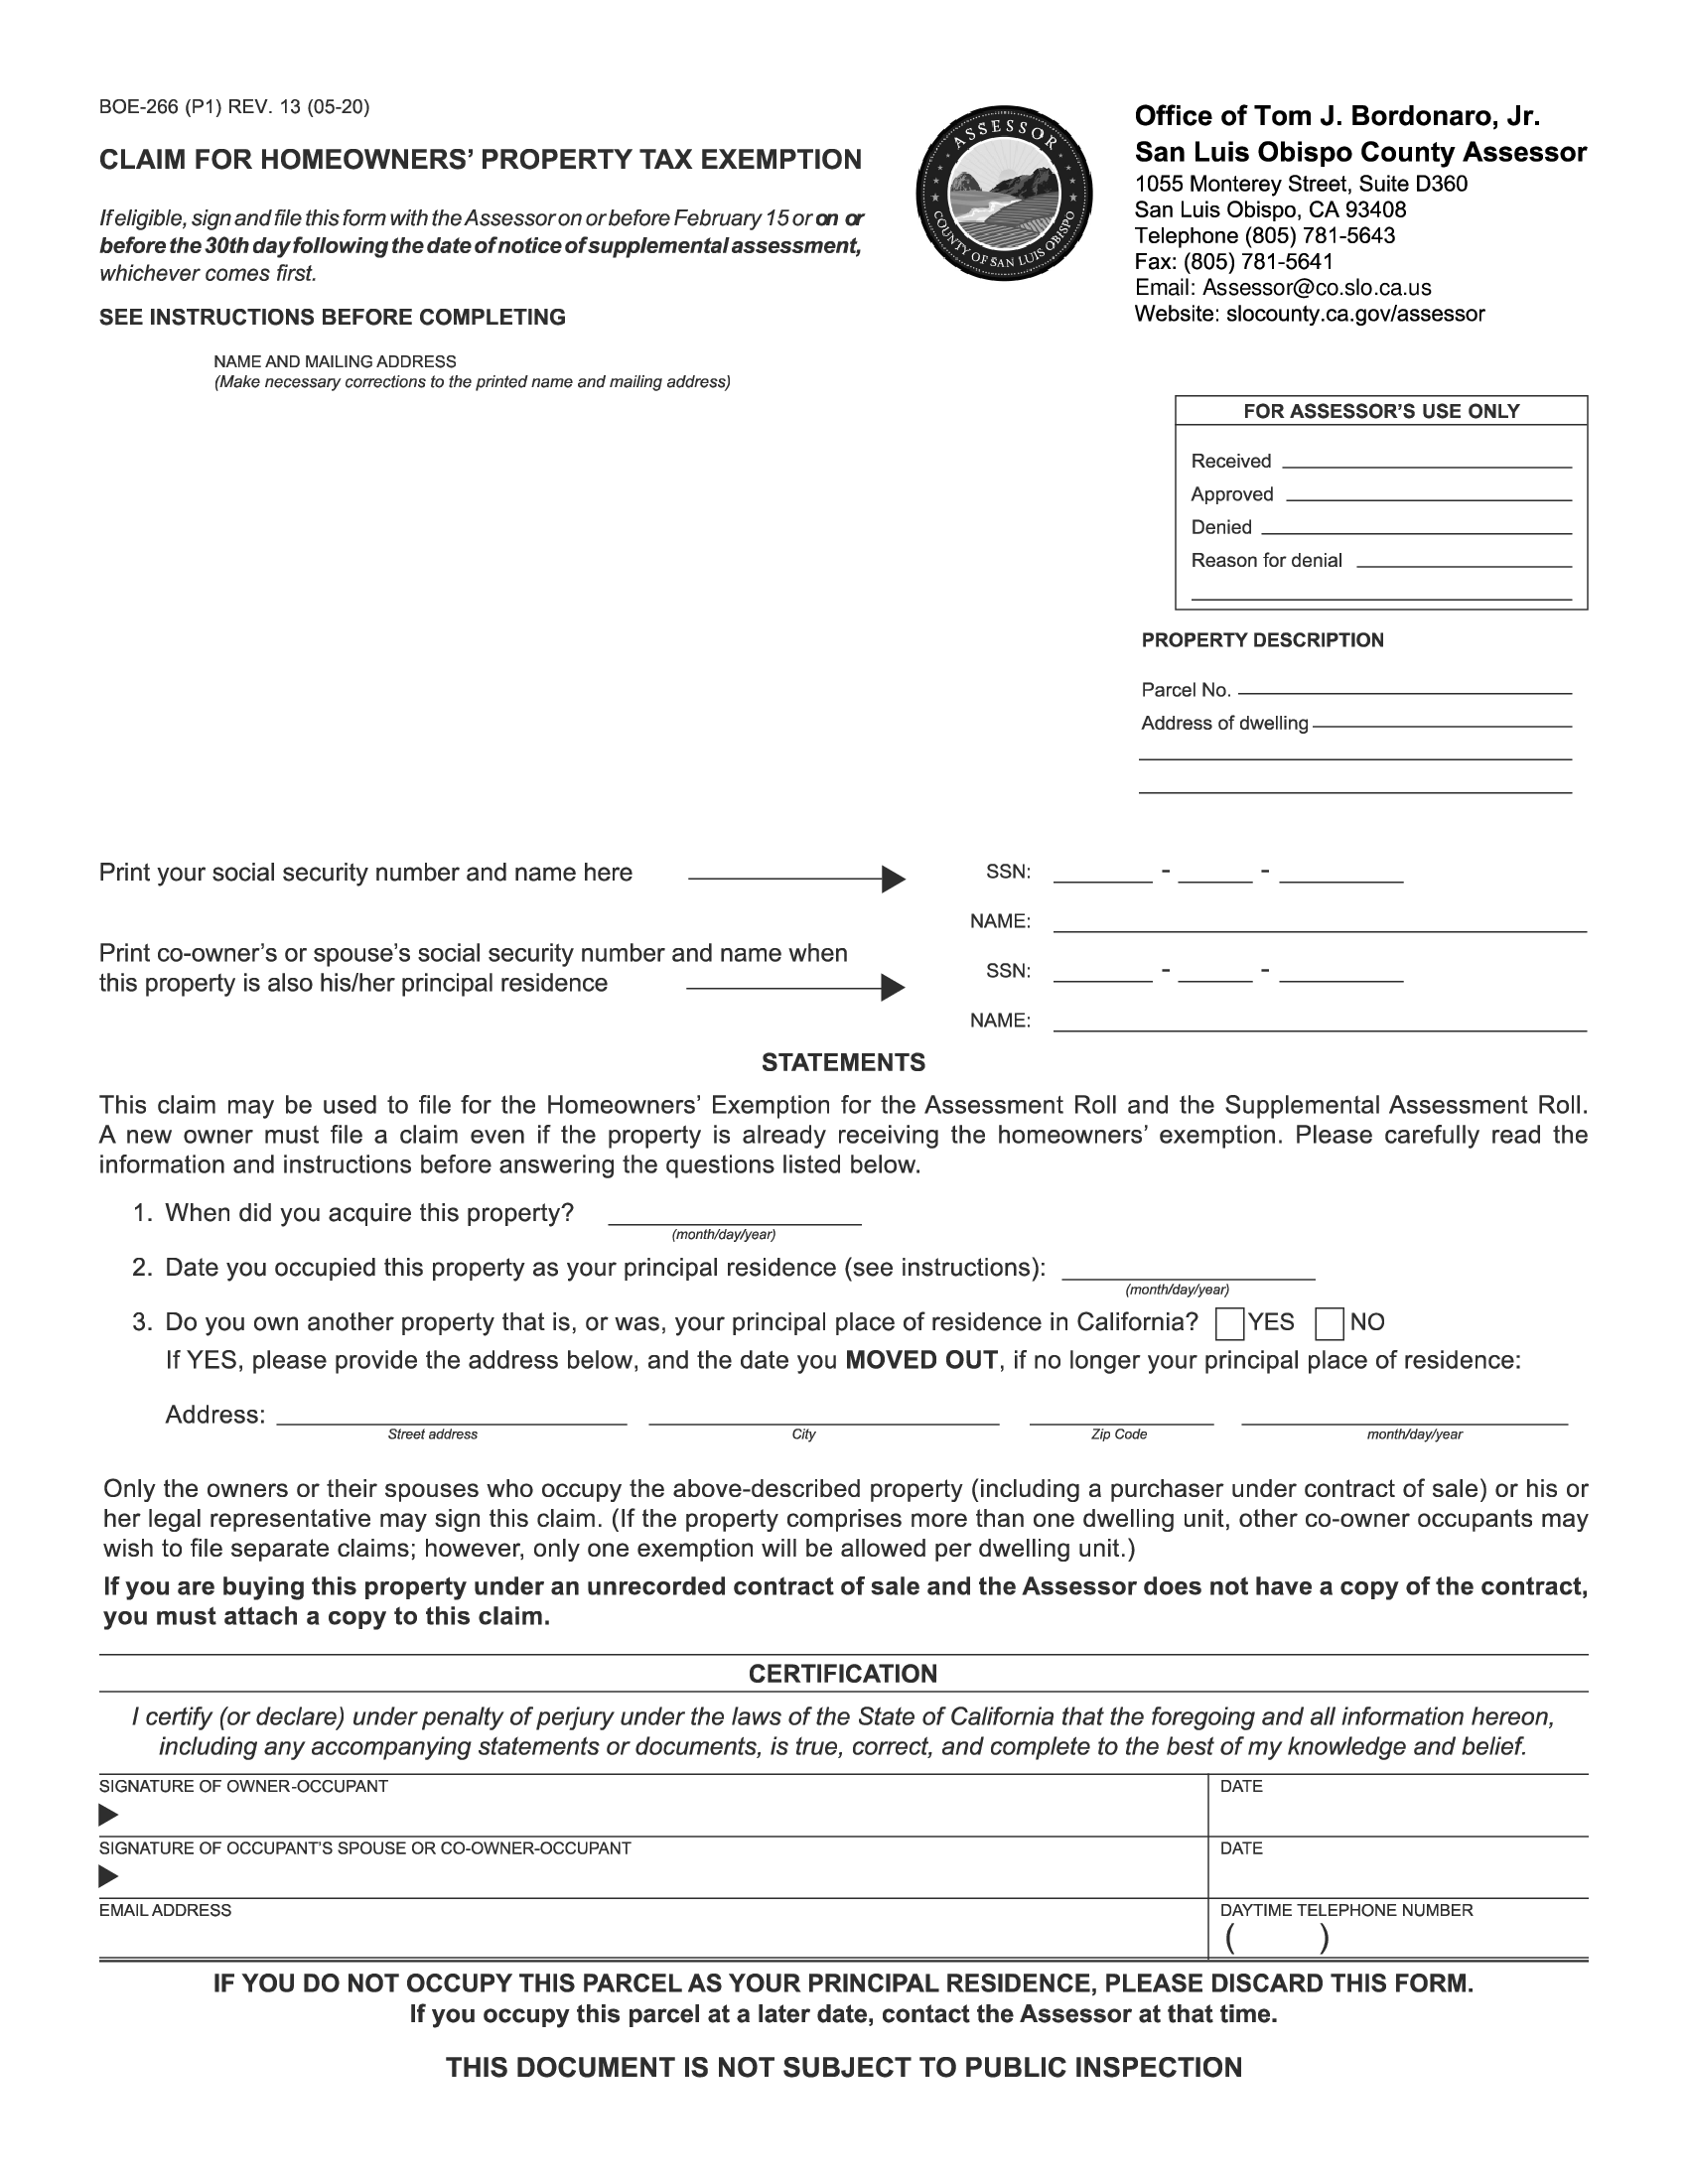 Form BOE266. Claim for Homeowners Property Tax Exemption Forms